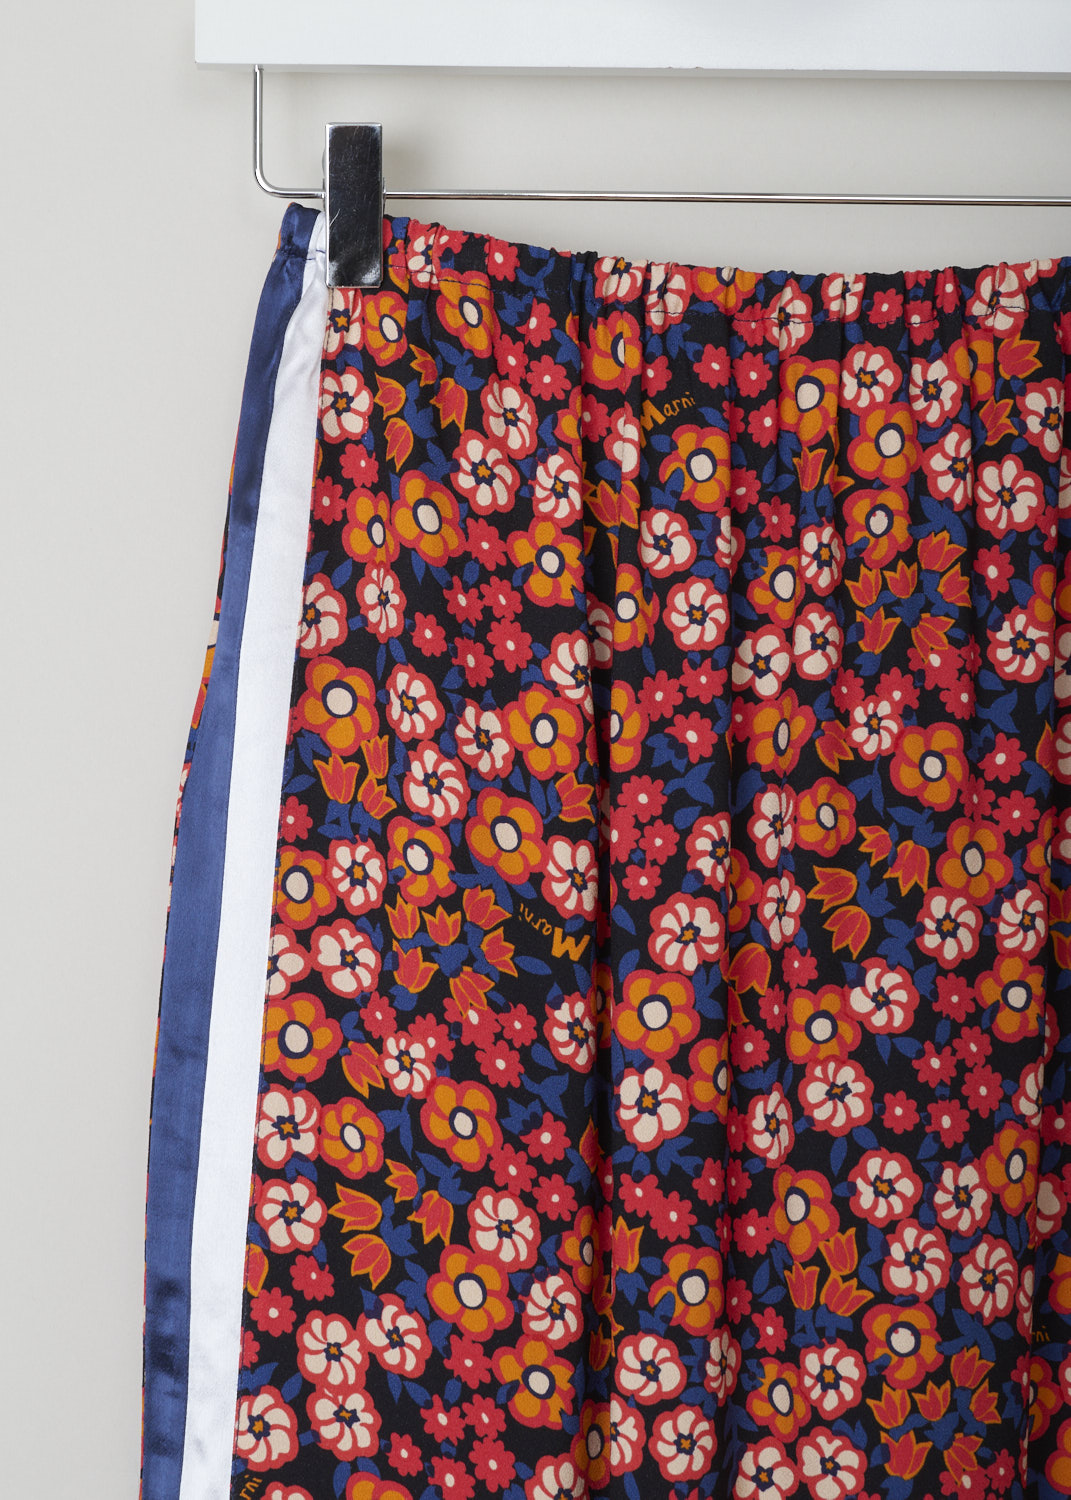 Marni, Red and blue floral pencil skirt, GOMA0348Q0_UTV823_PGN99, red blue white, detail, Red pencil skirt embellished with a red and blue floral design, the side seam of this skirt comes adorned with blue and white stripes along the whole length. The closure method of this skirt comes win the form of an elastic waistband.